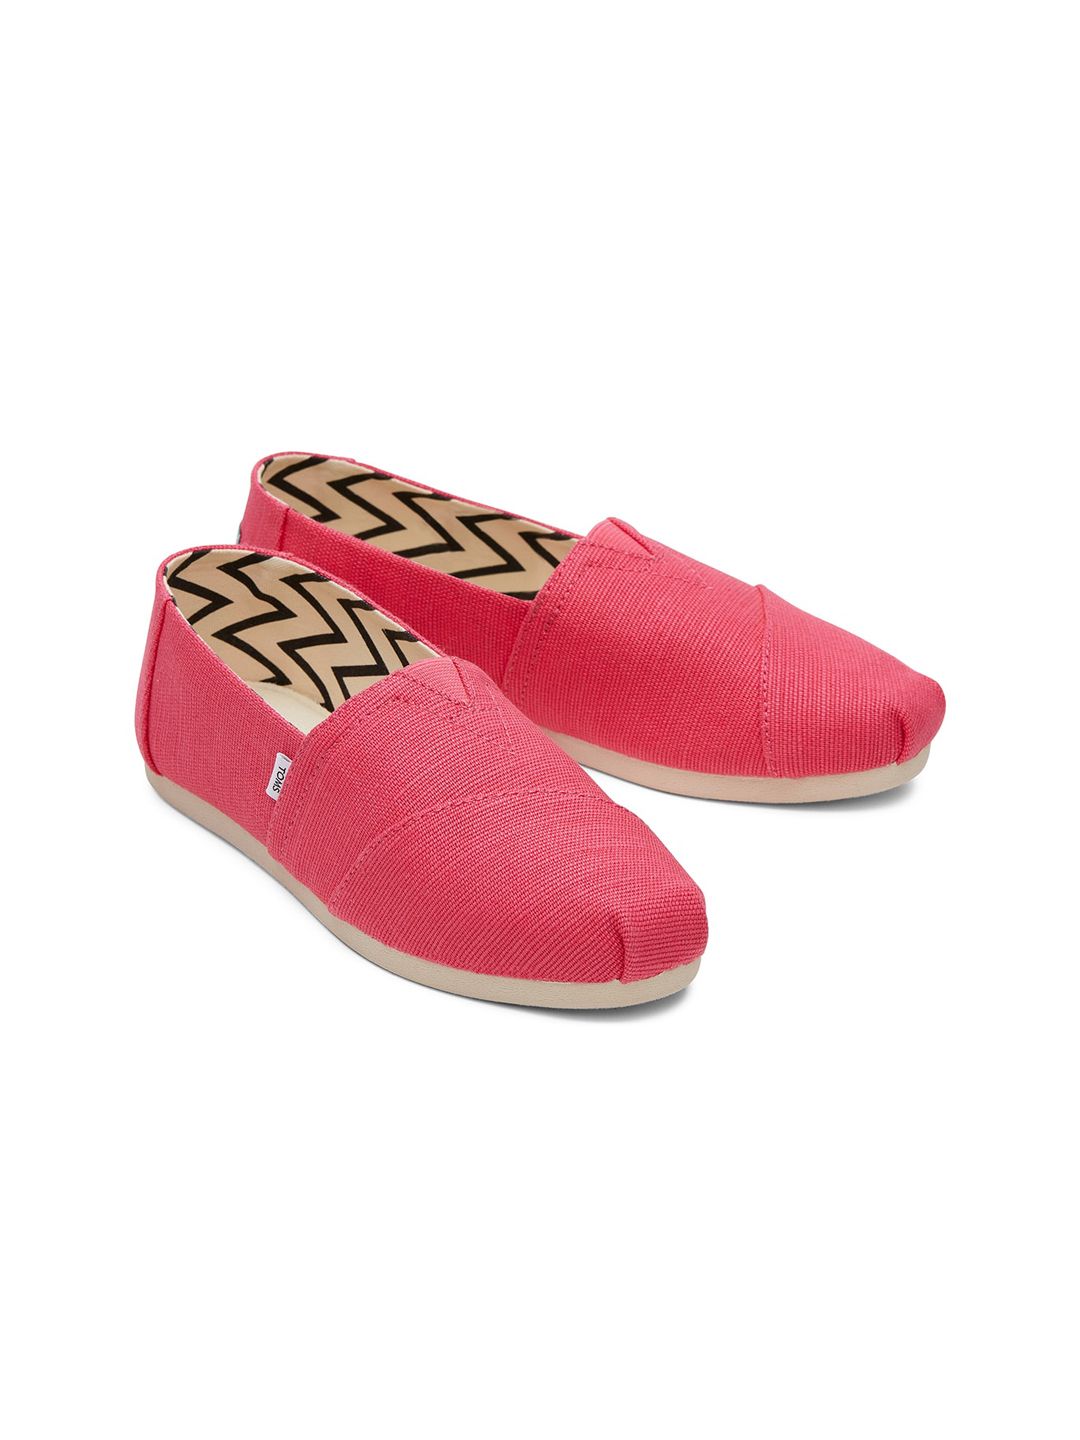 TOMS Women Pink Alpargata Canvas Slip-On Sneakers Price in India